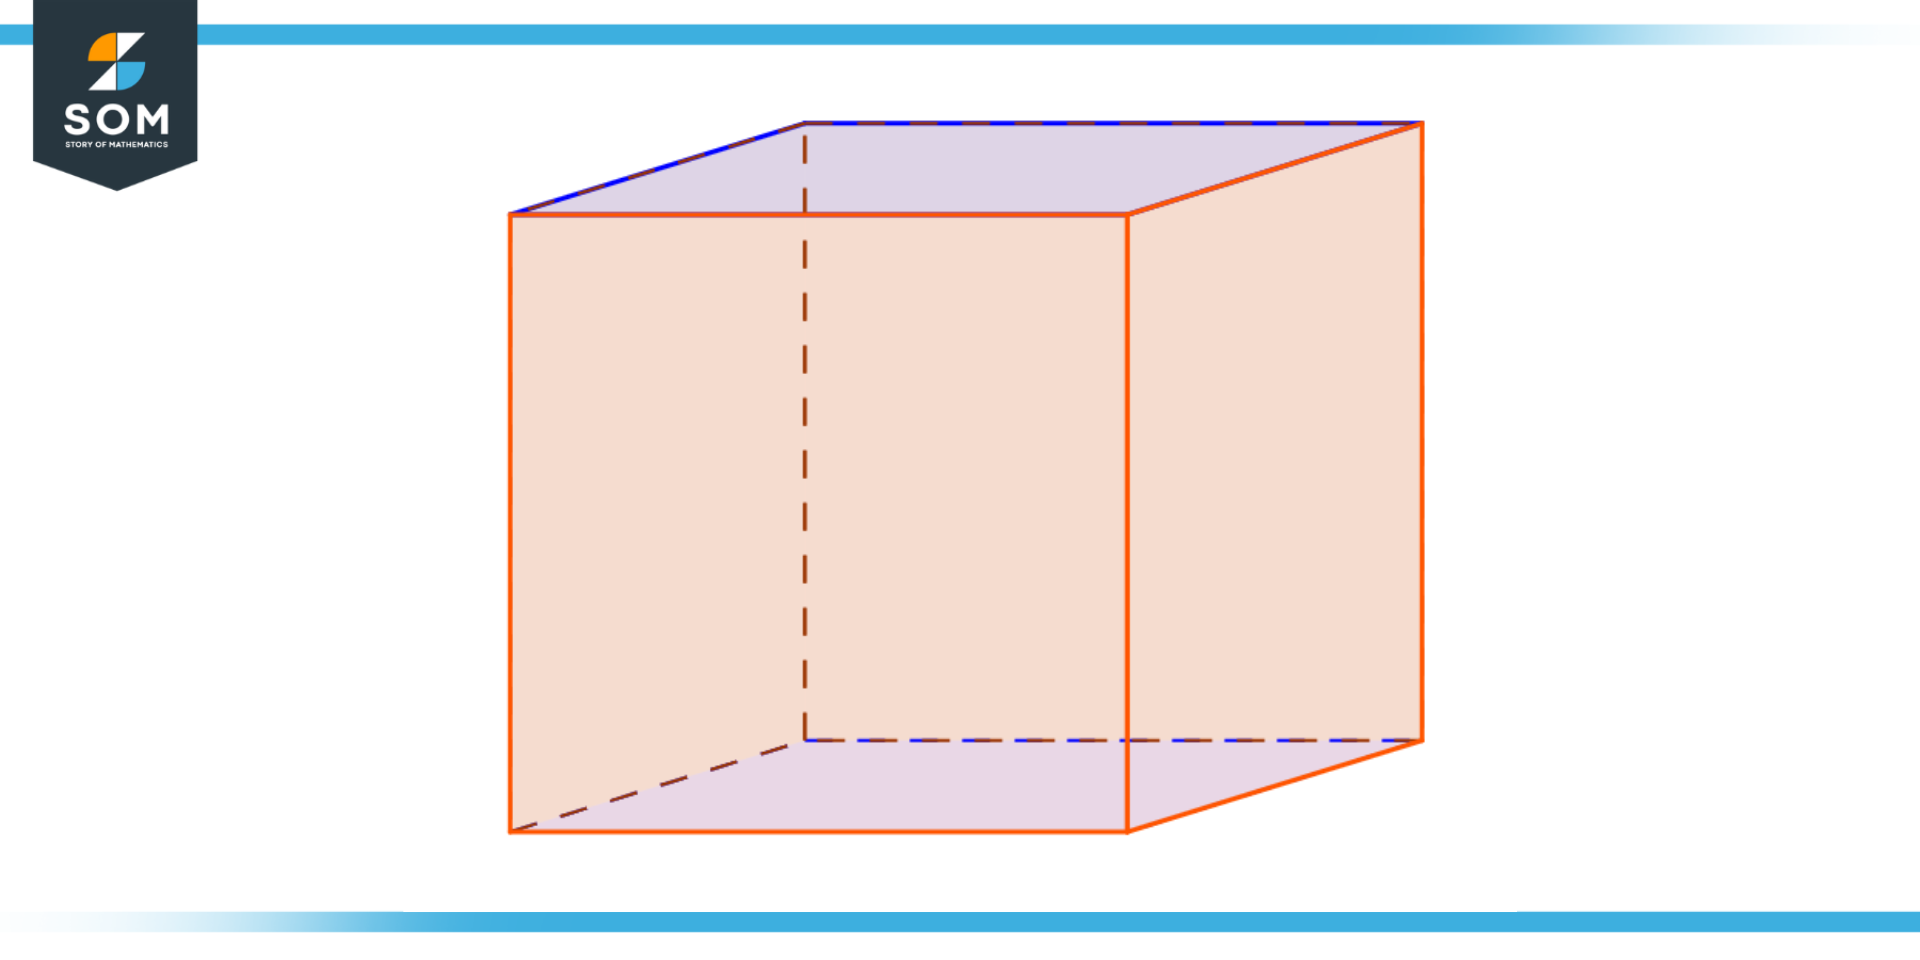 Illustration of rectangular prism used in various applications in daily life